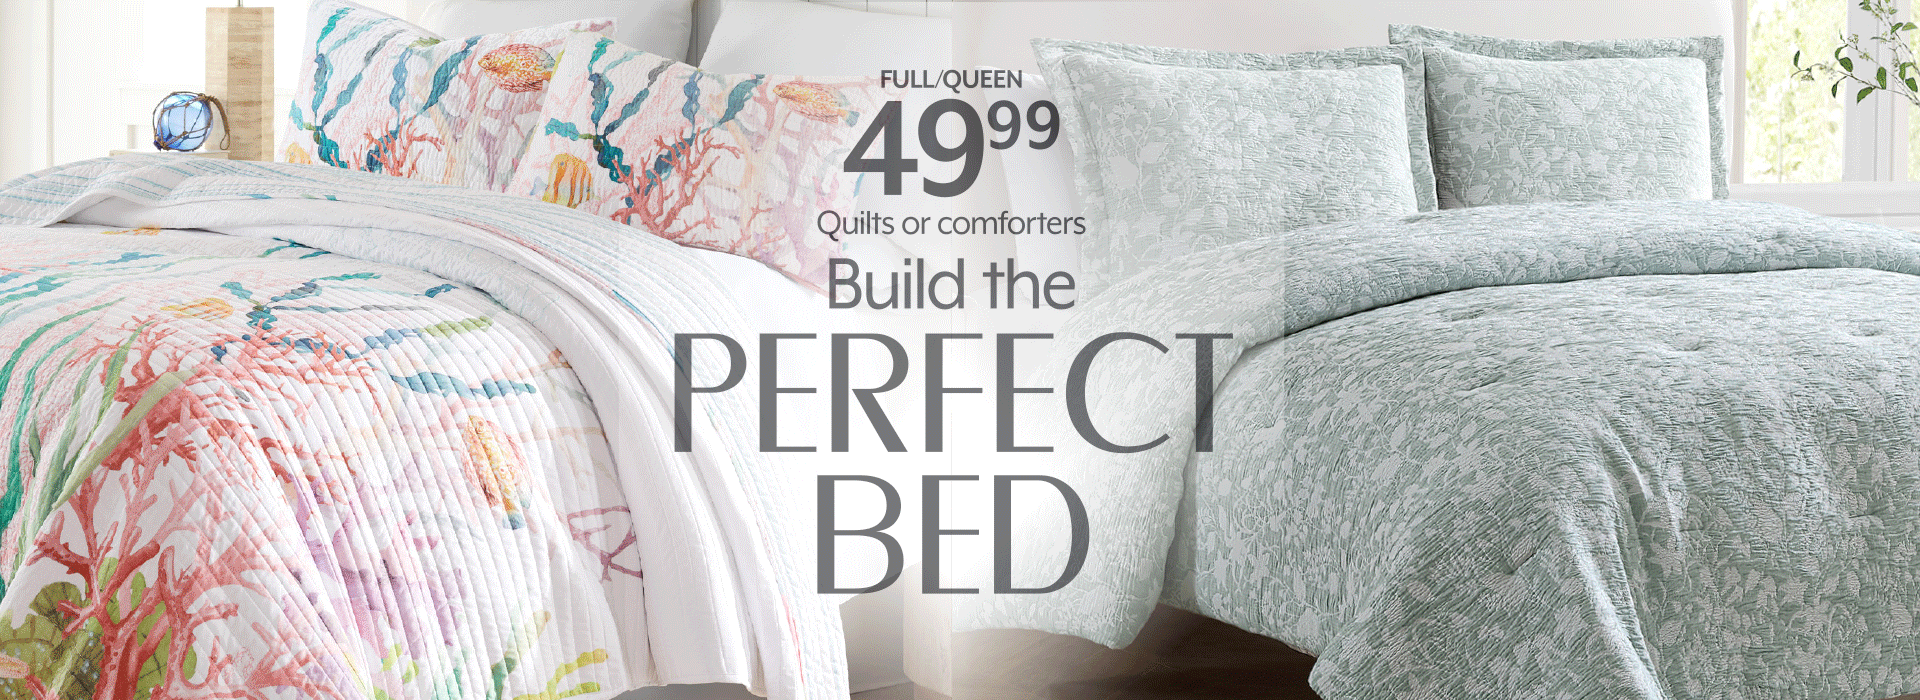 Build your perfect bed